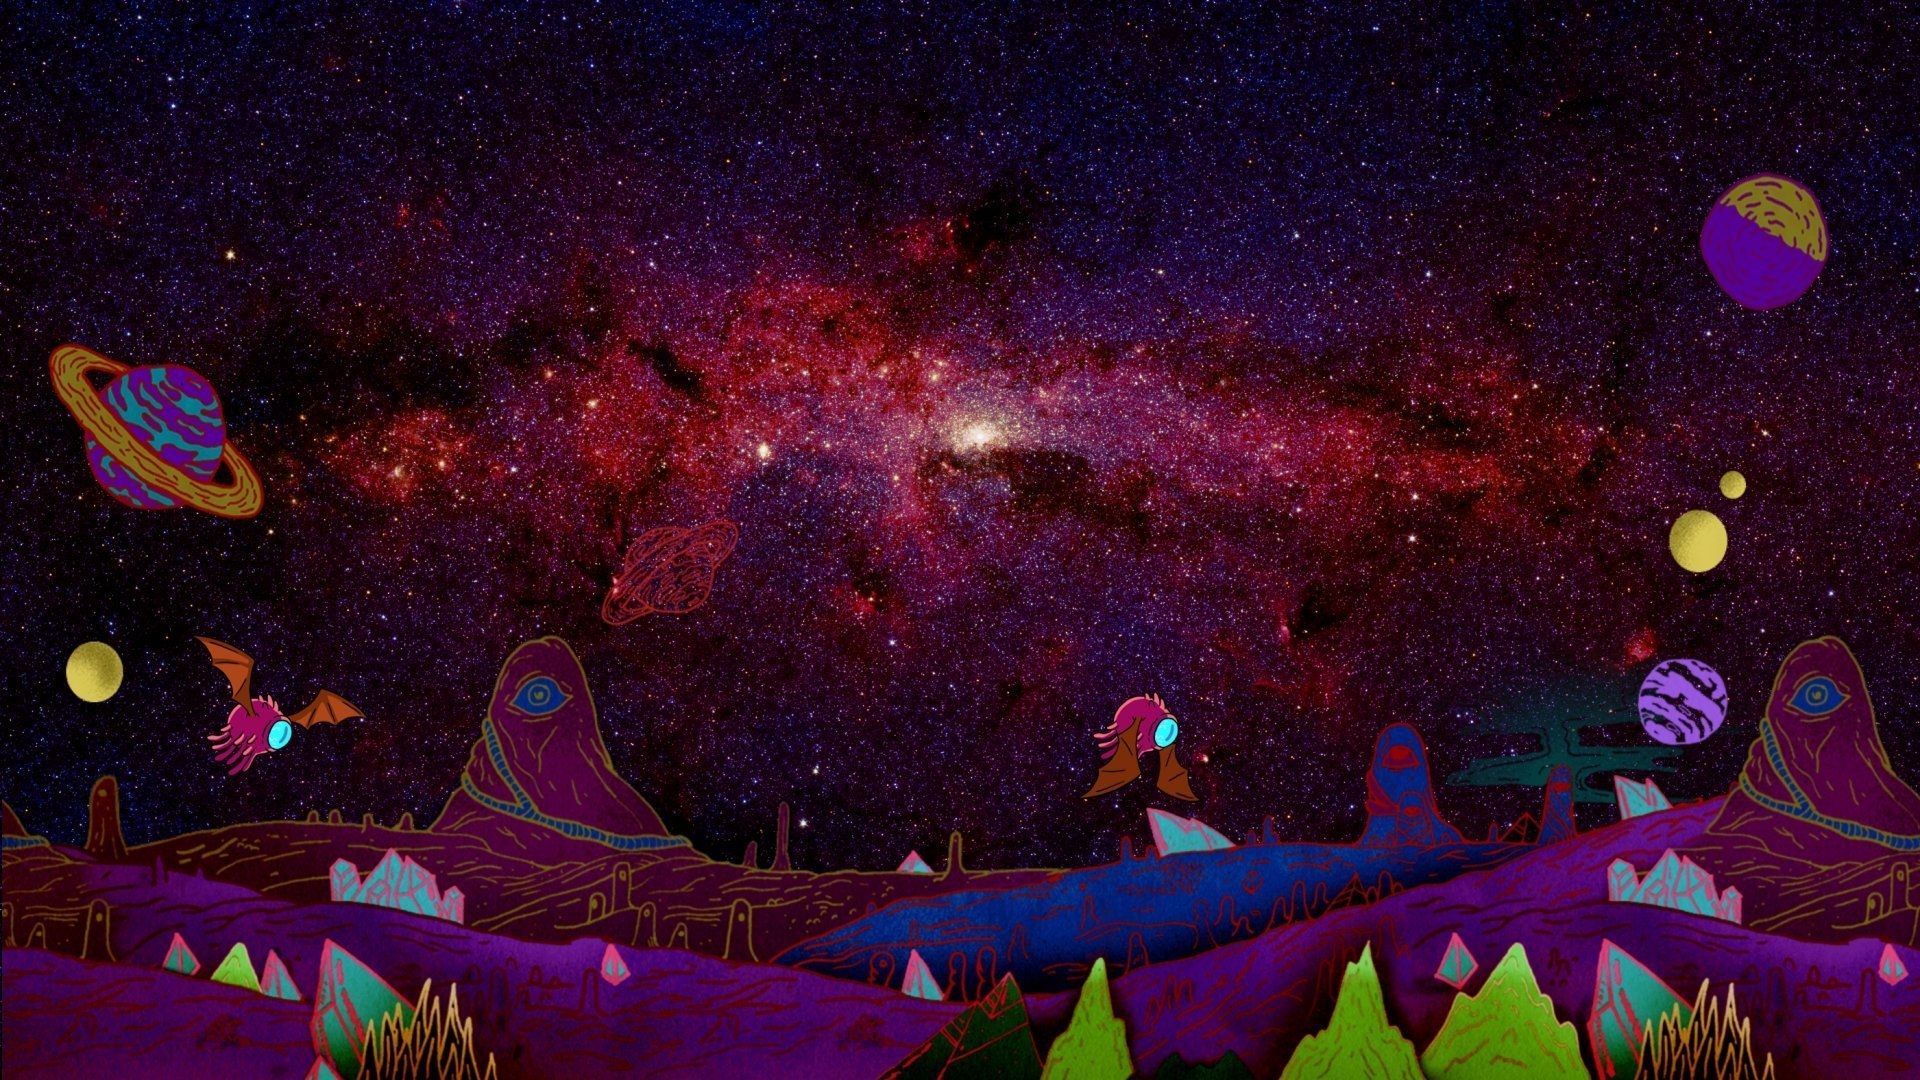 Rick and Morty high resolution wallpaper